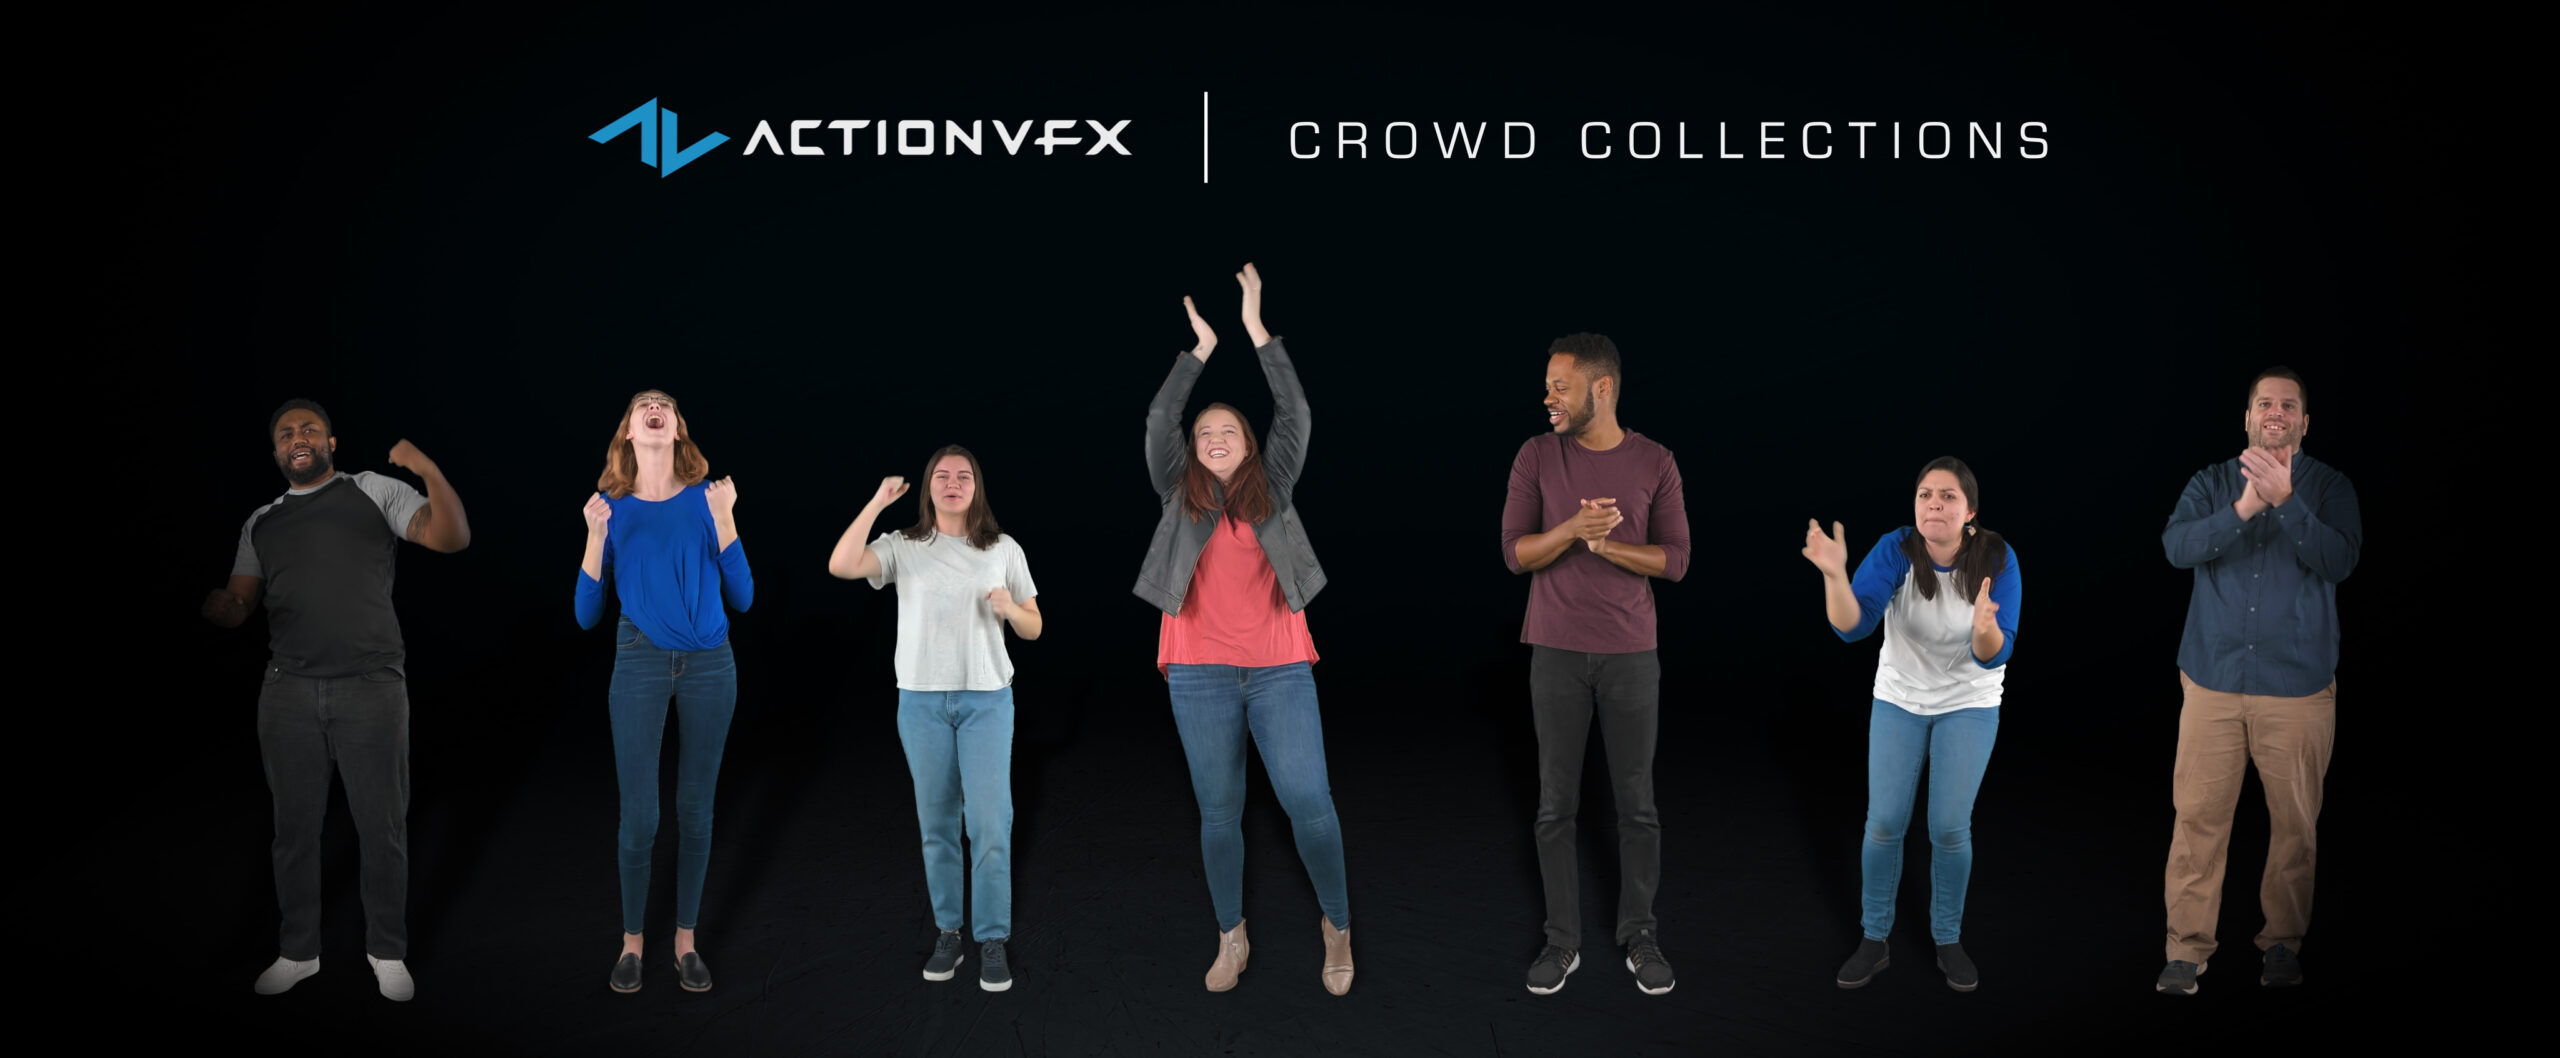 ActionVFX Will Launch Revolutionary Crowd Stock Footage Monday, May